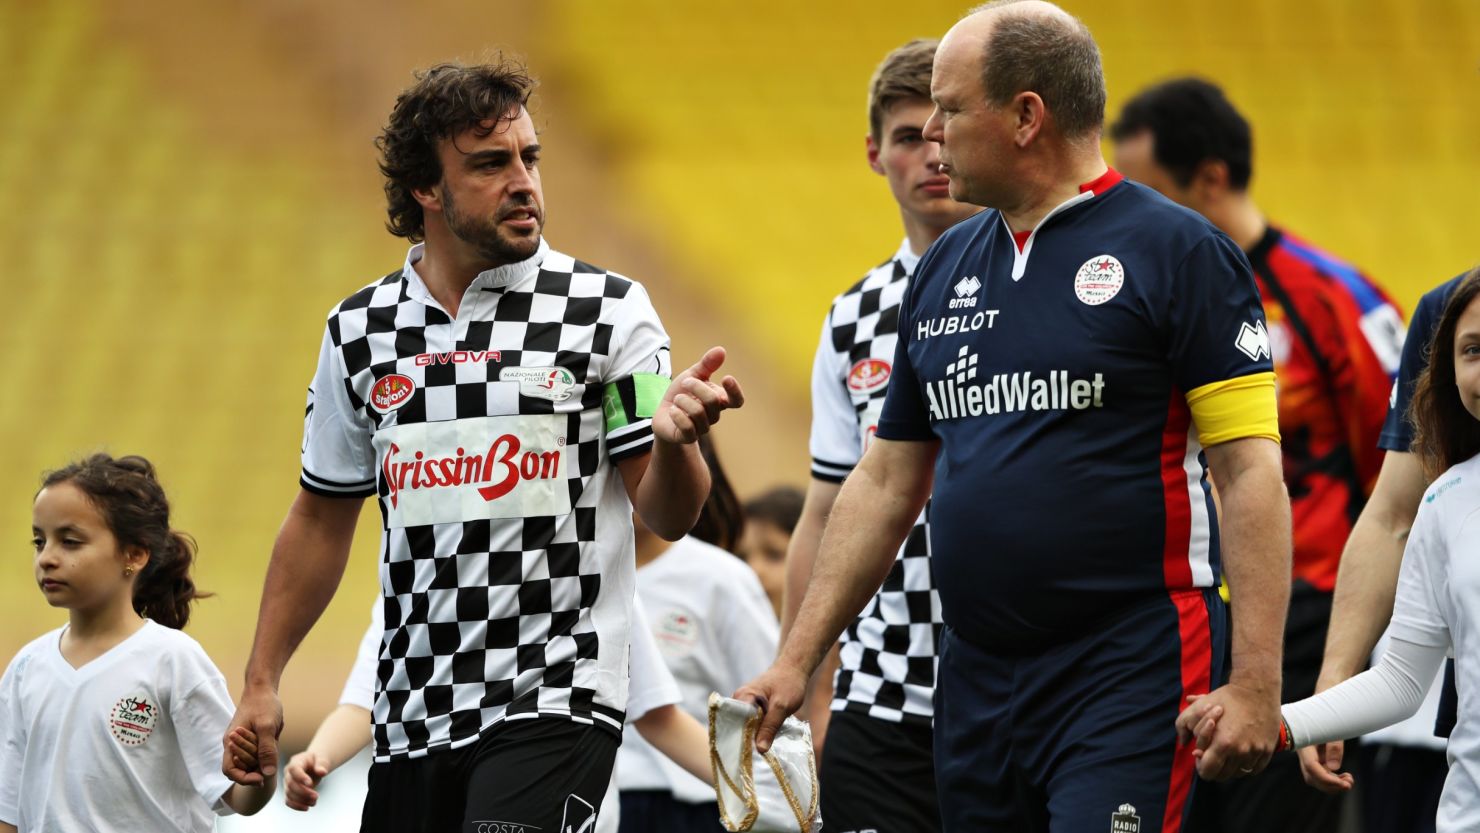 F1 star Fernando Alonso talks to Prince Albert II of Monaco as the pair lead the teams out for a charity soccer match ahead of the weekend's Monaco Grand Prix.